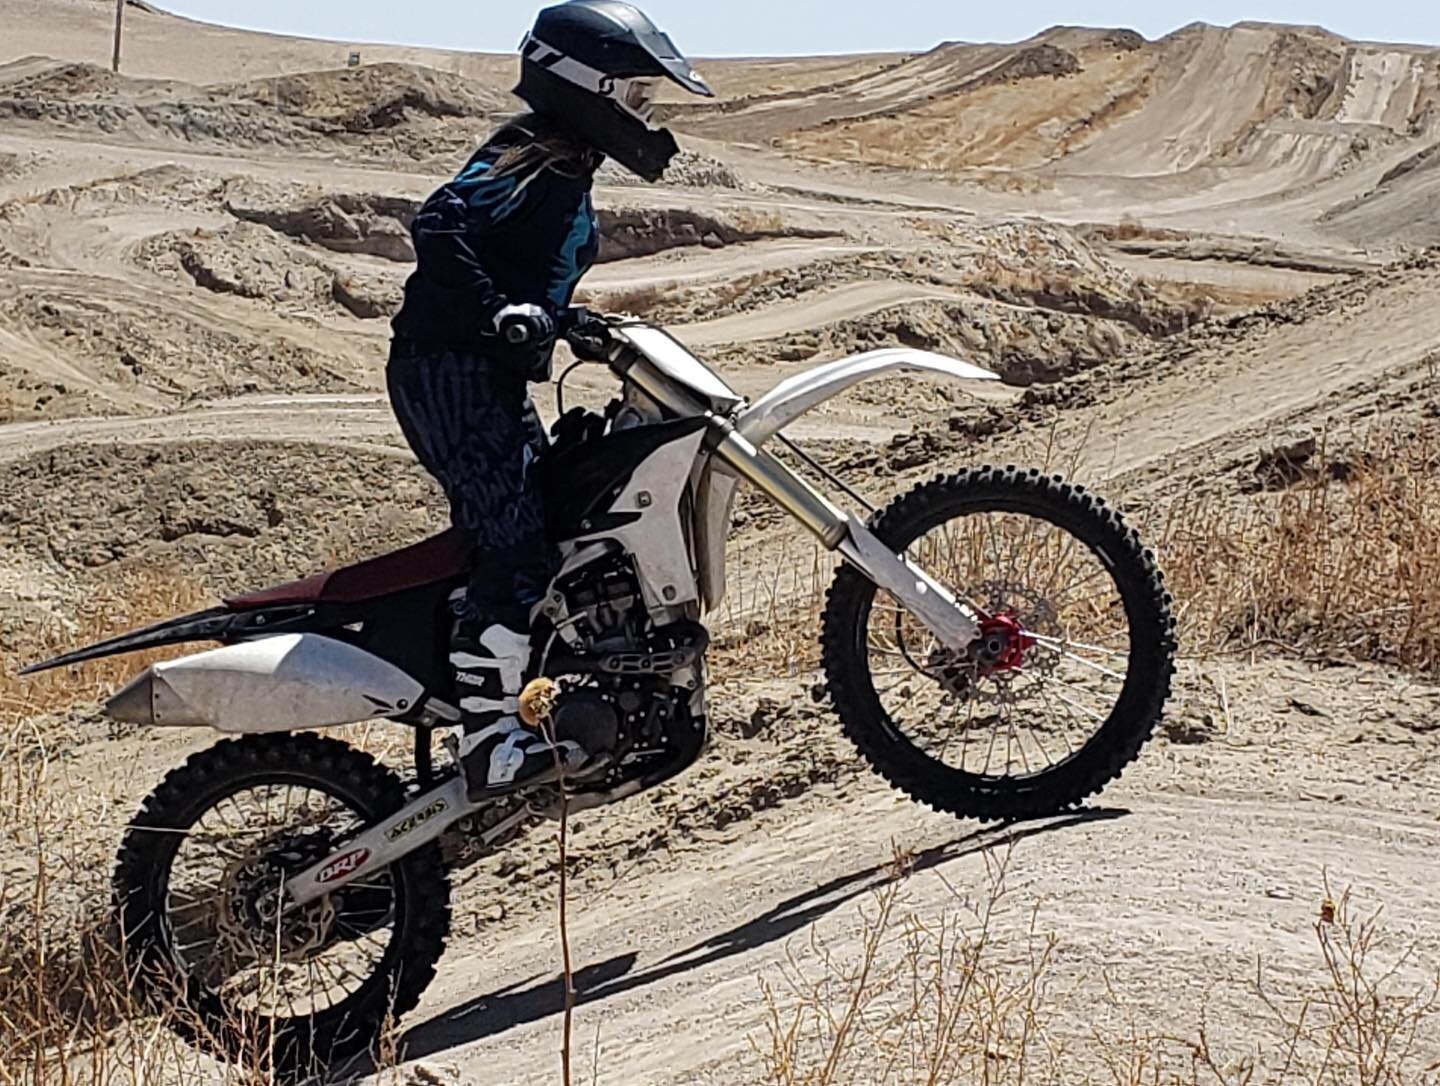 This month&rsquo;s member highlight comes from one of our @ramoffroadpark riders, Rebecca. Thank you for sharing a little about yourself Rebecca! 
Name: My name is @miracle.child.2002 
Where are you from/ what brought you here? I live on the edge of 